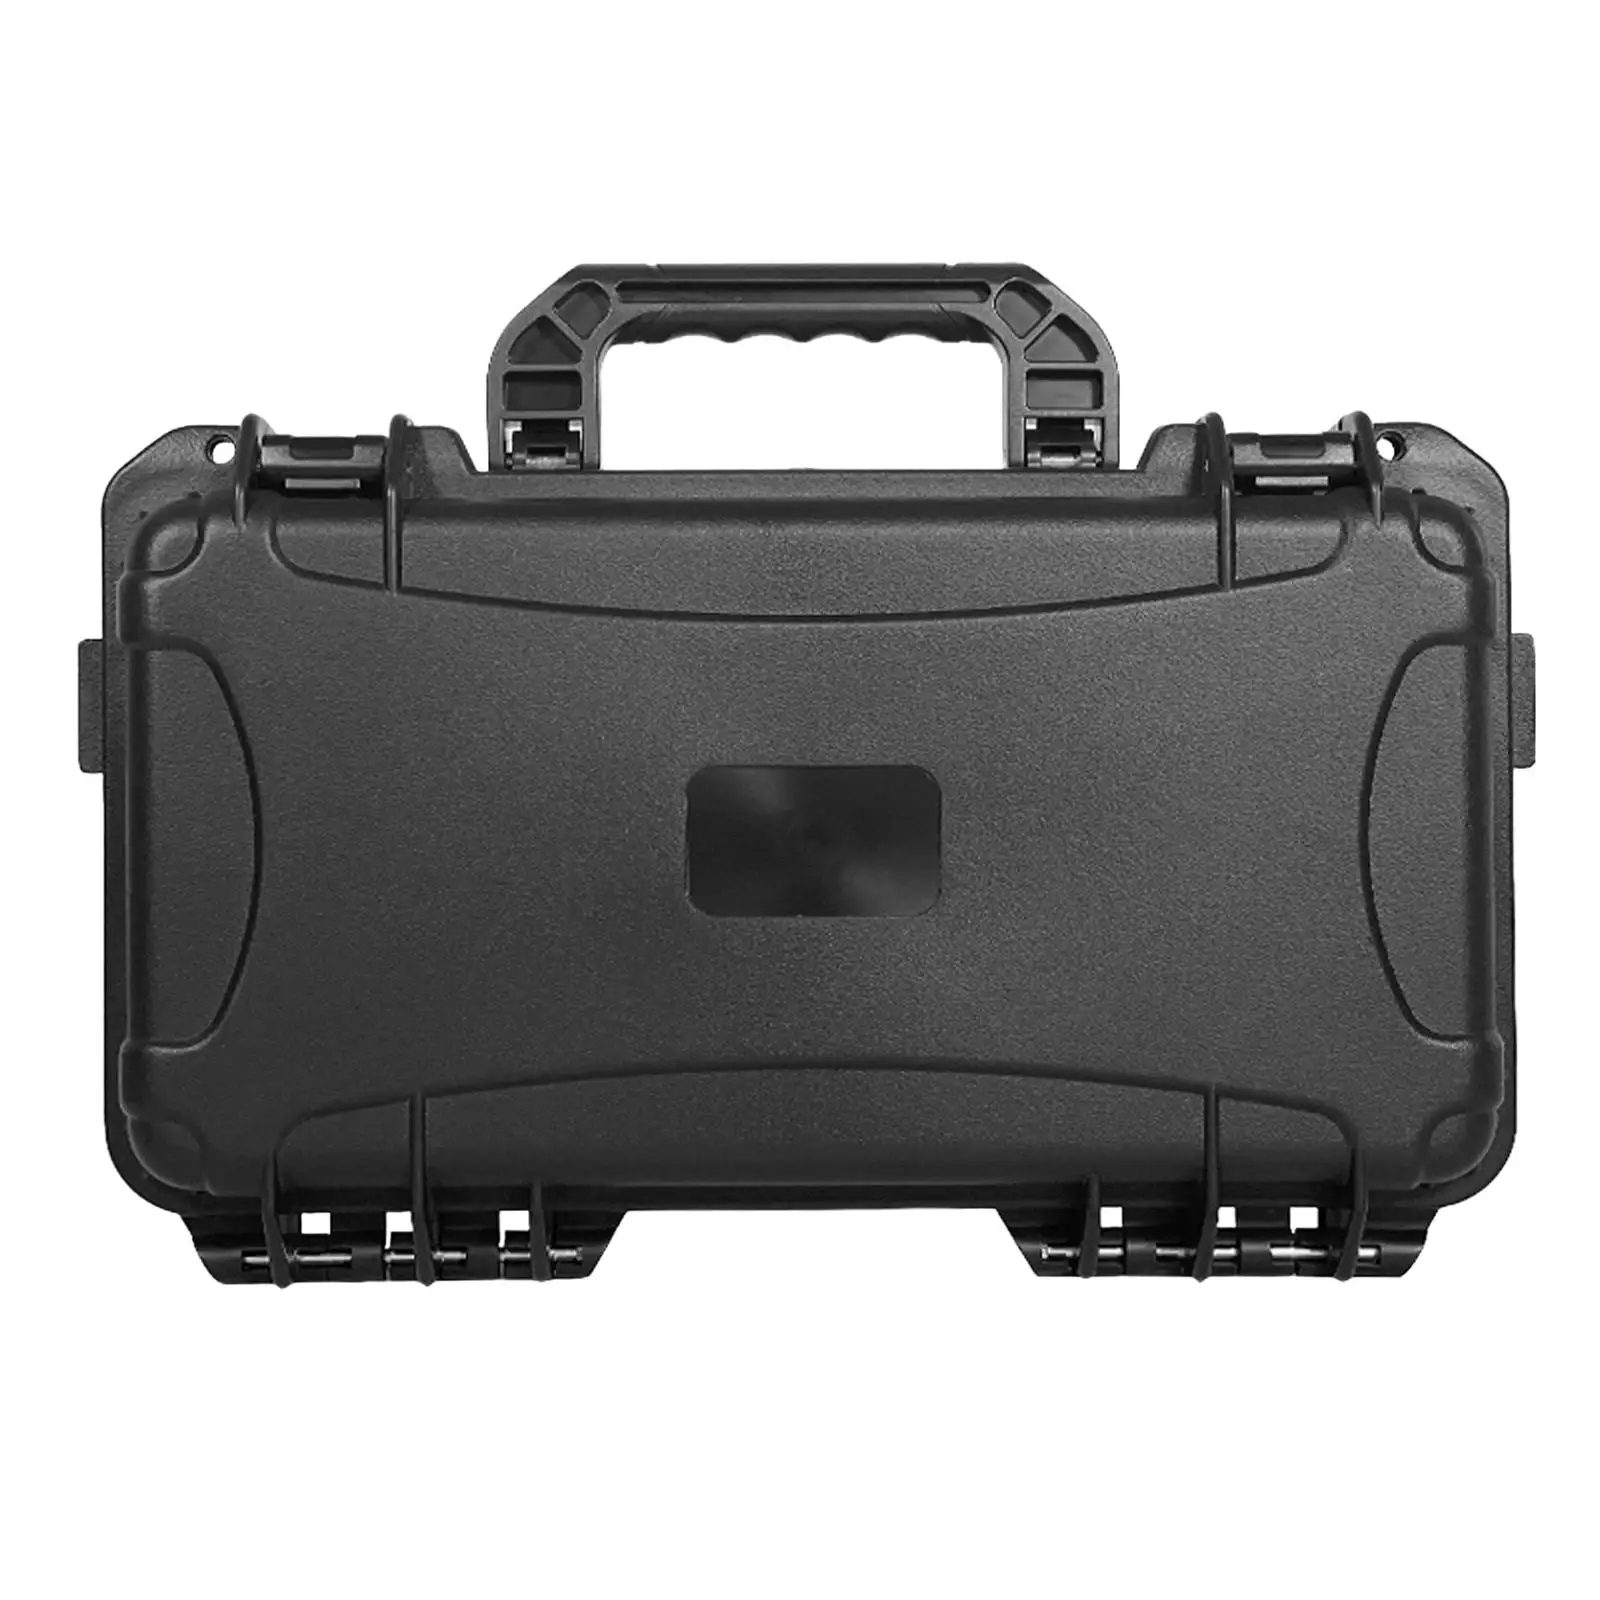 Sealed Box Shatterproof Outdoor Transport Case Outdoor Storage Case for Aviation Photographic Equipment Camping Travel Home